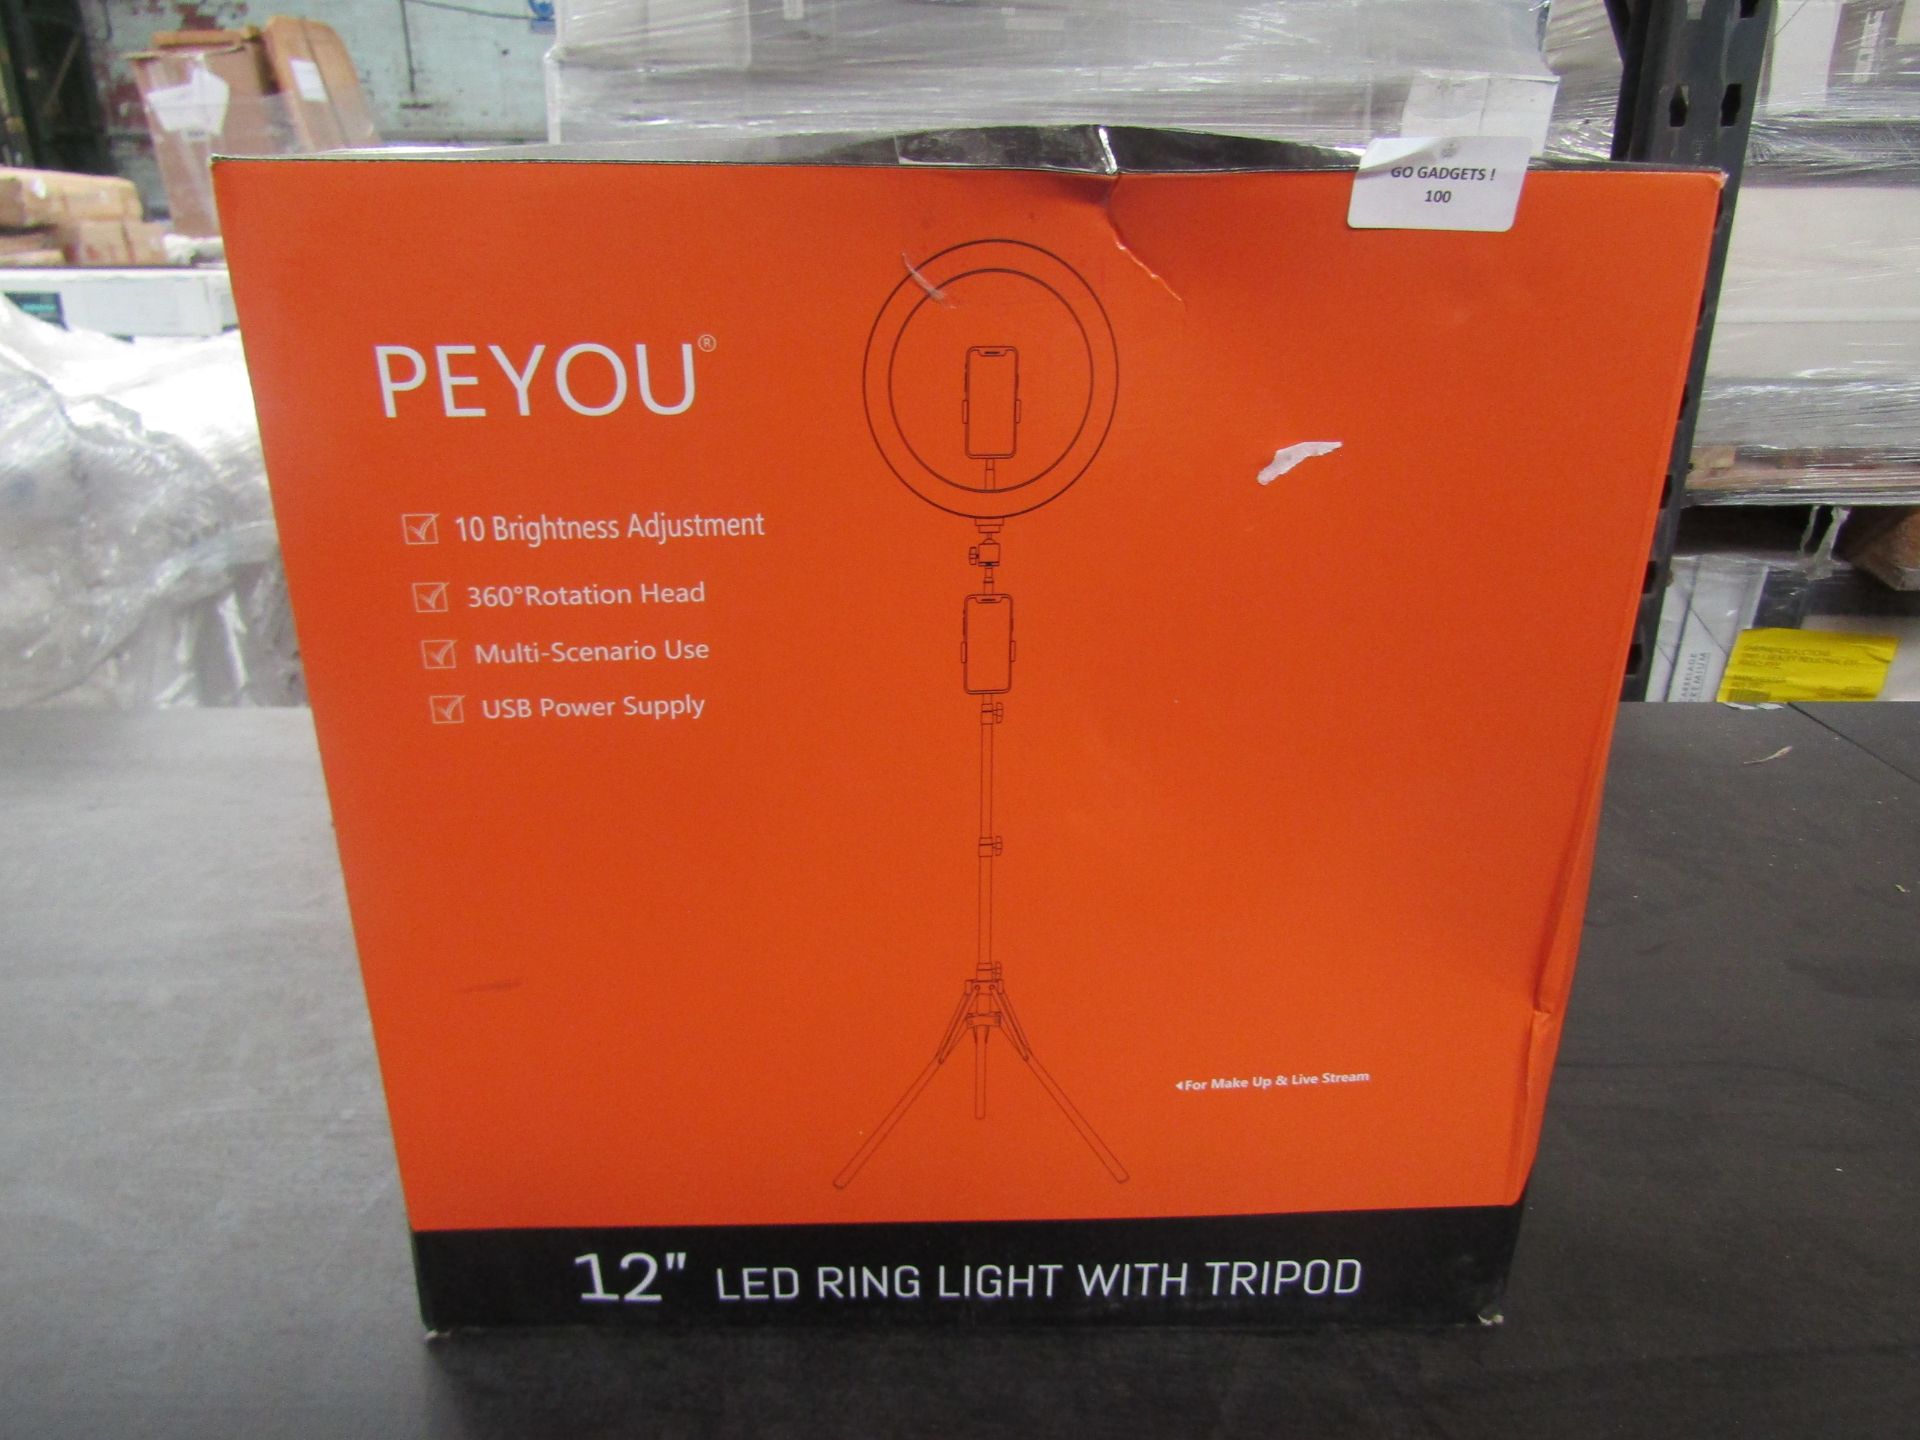 Peyou 12" 360* Rotation Head LED Ring Light With Tripod - Unchecked & Boxed.